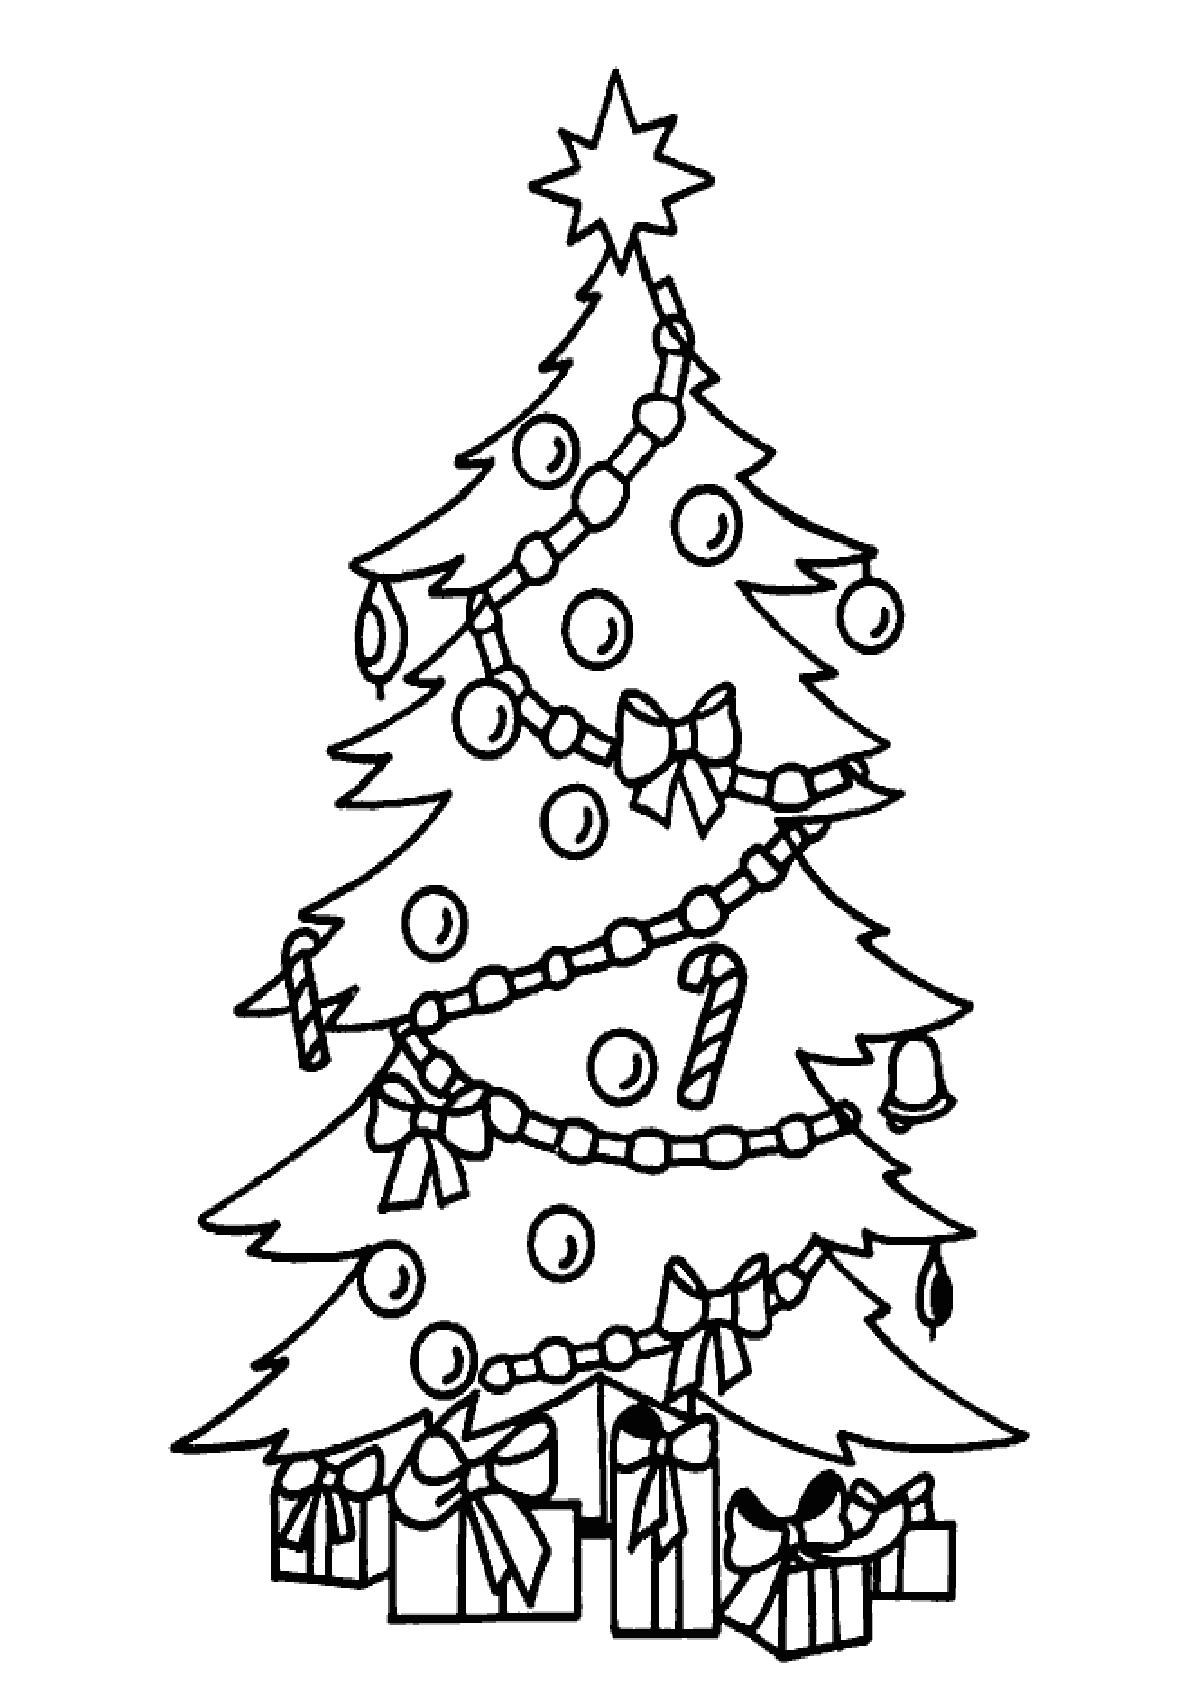 Christmas Tree Coloring Pages for childrens printable for free